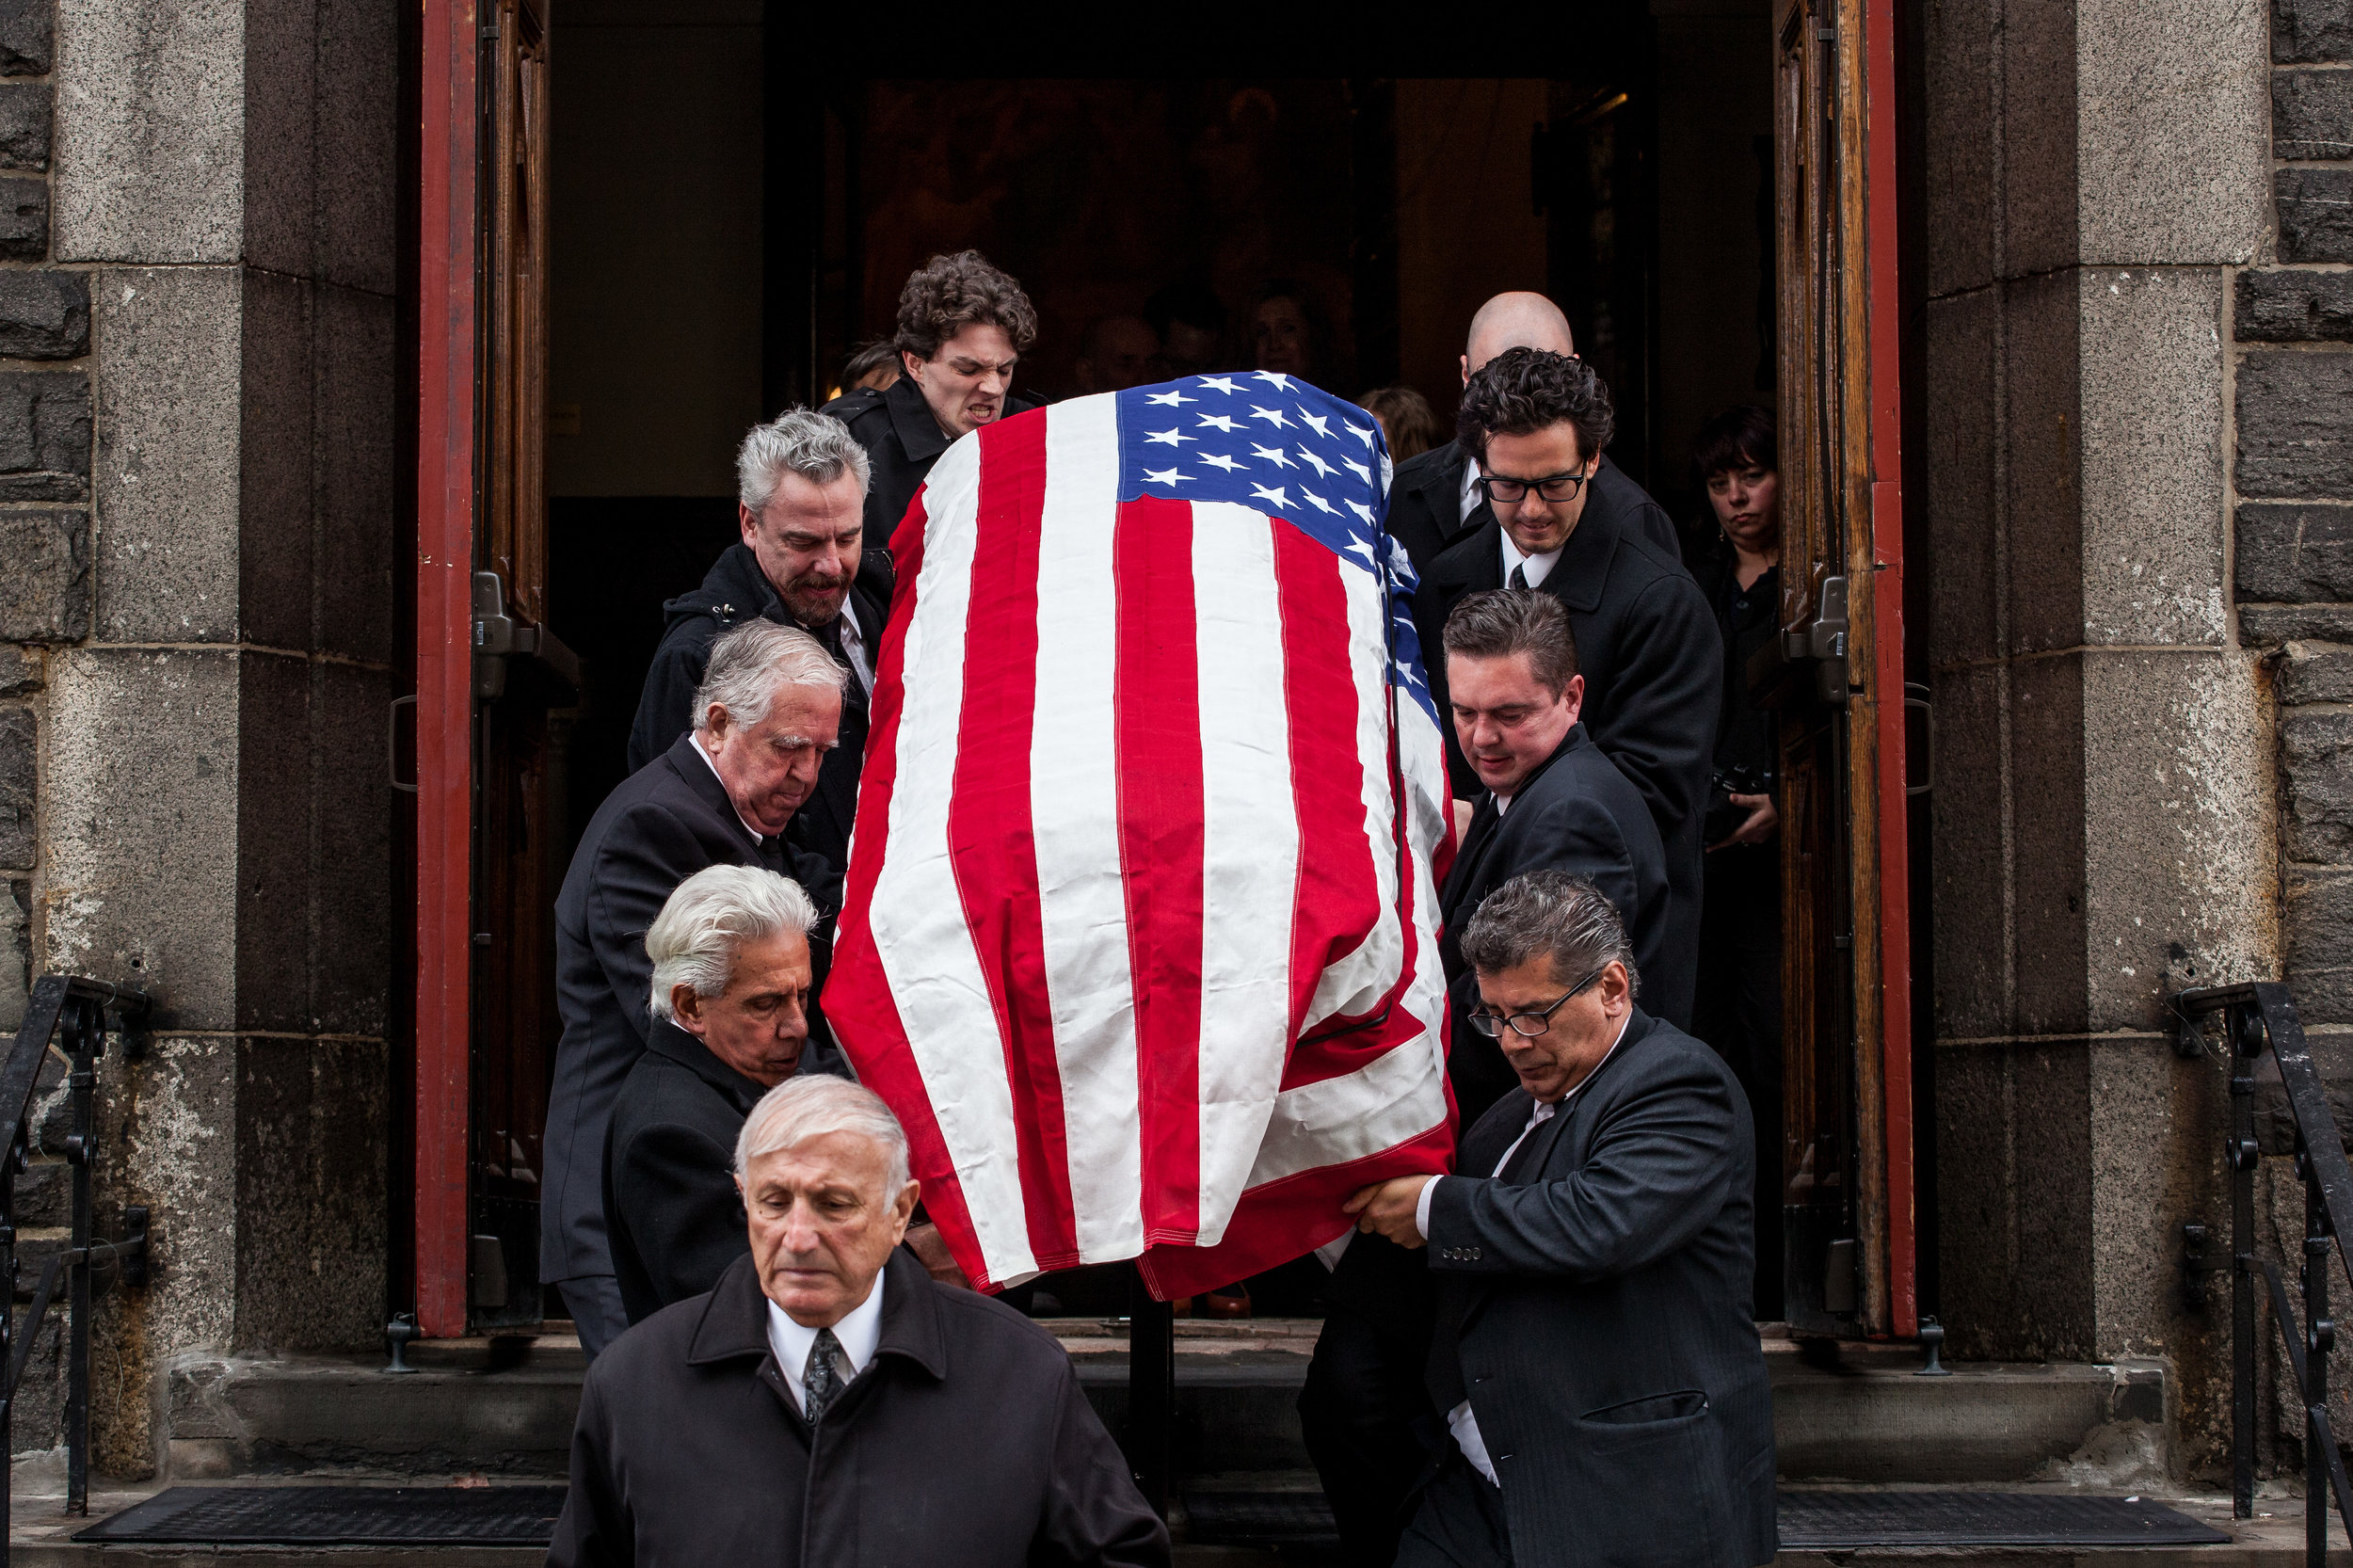  Sonny Balzano, owner of the Red Hook institution Sunny's Bar, is laid to rest. 